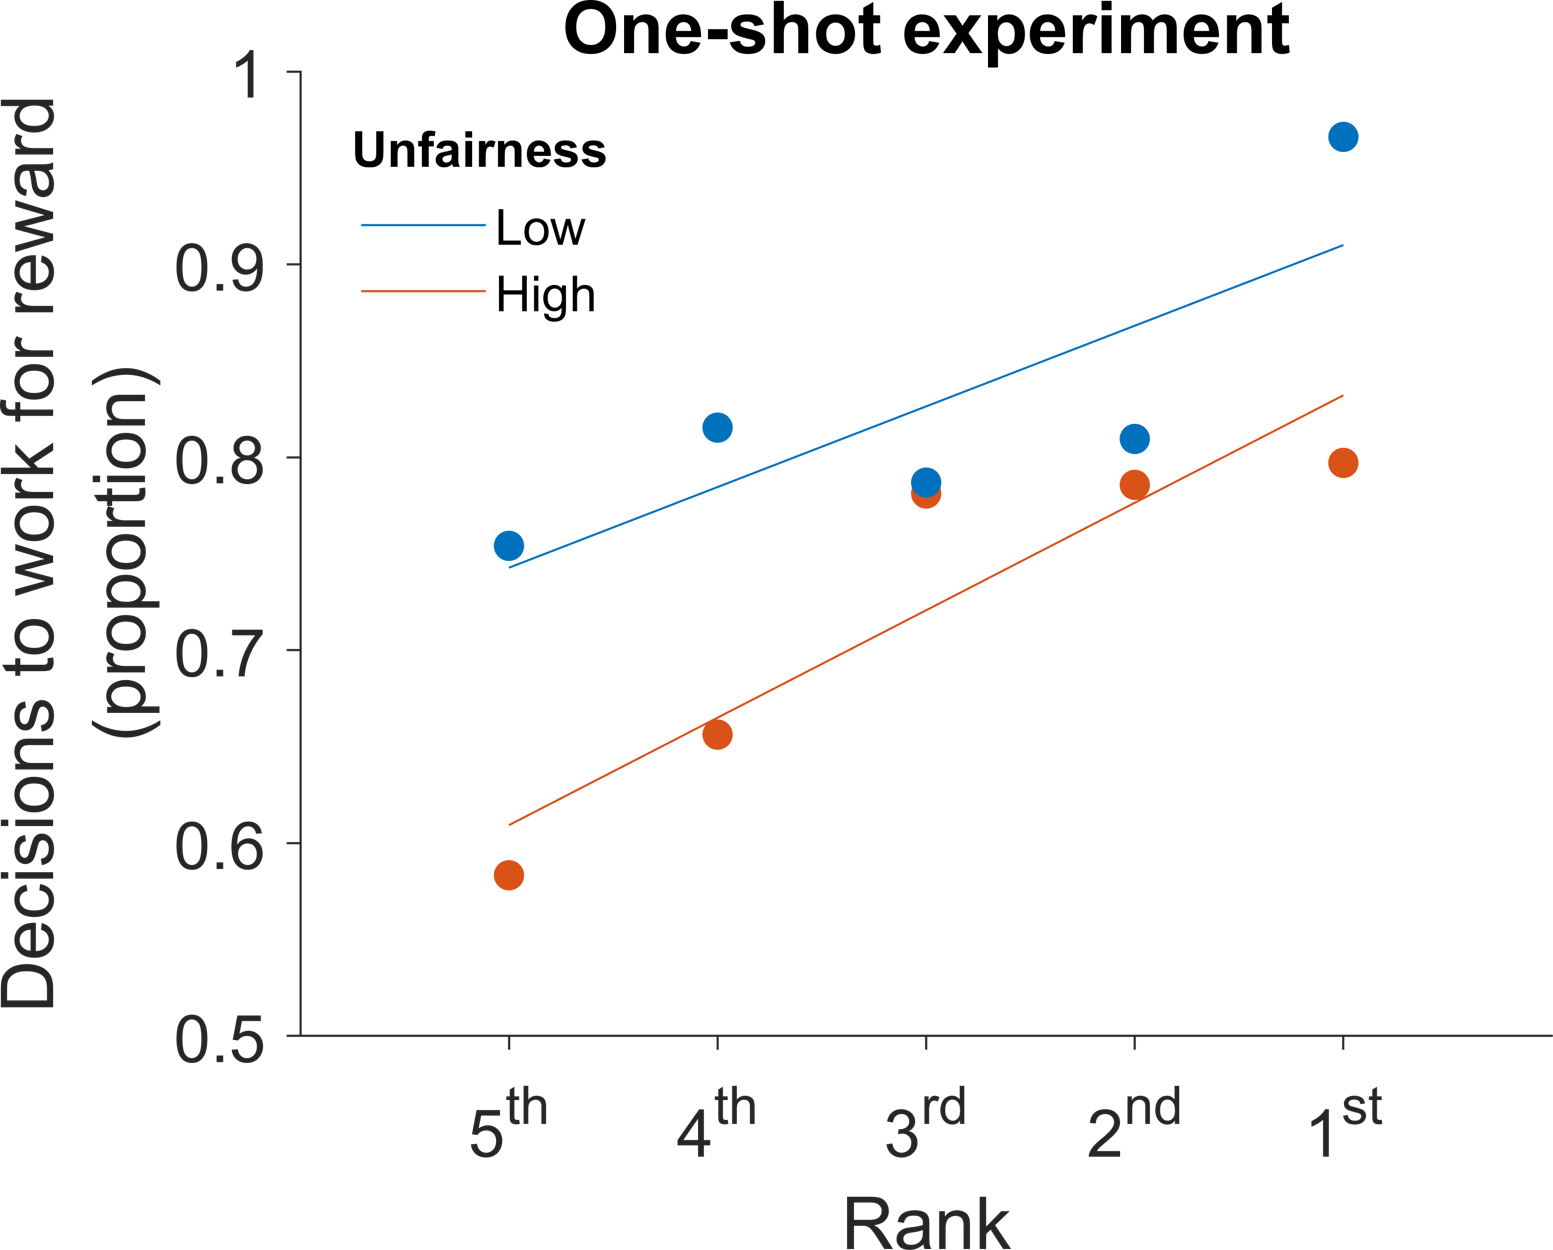 graph showing one shot experiment results